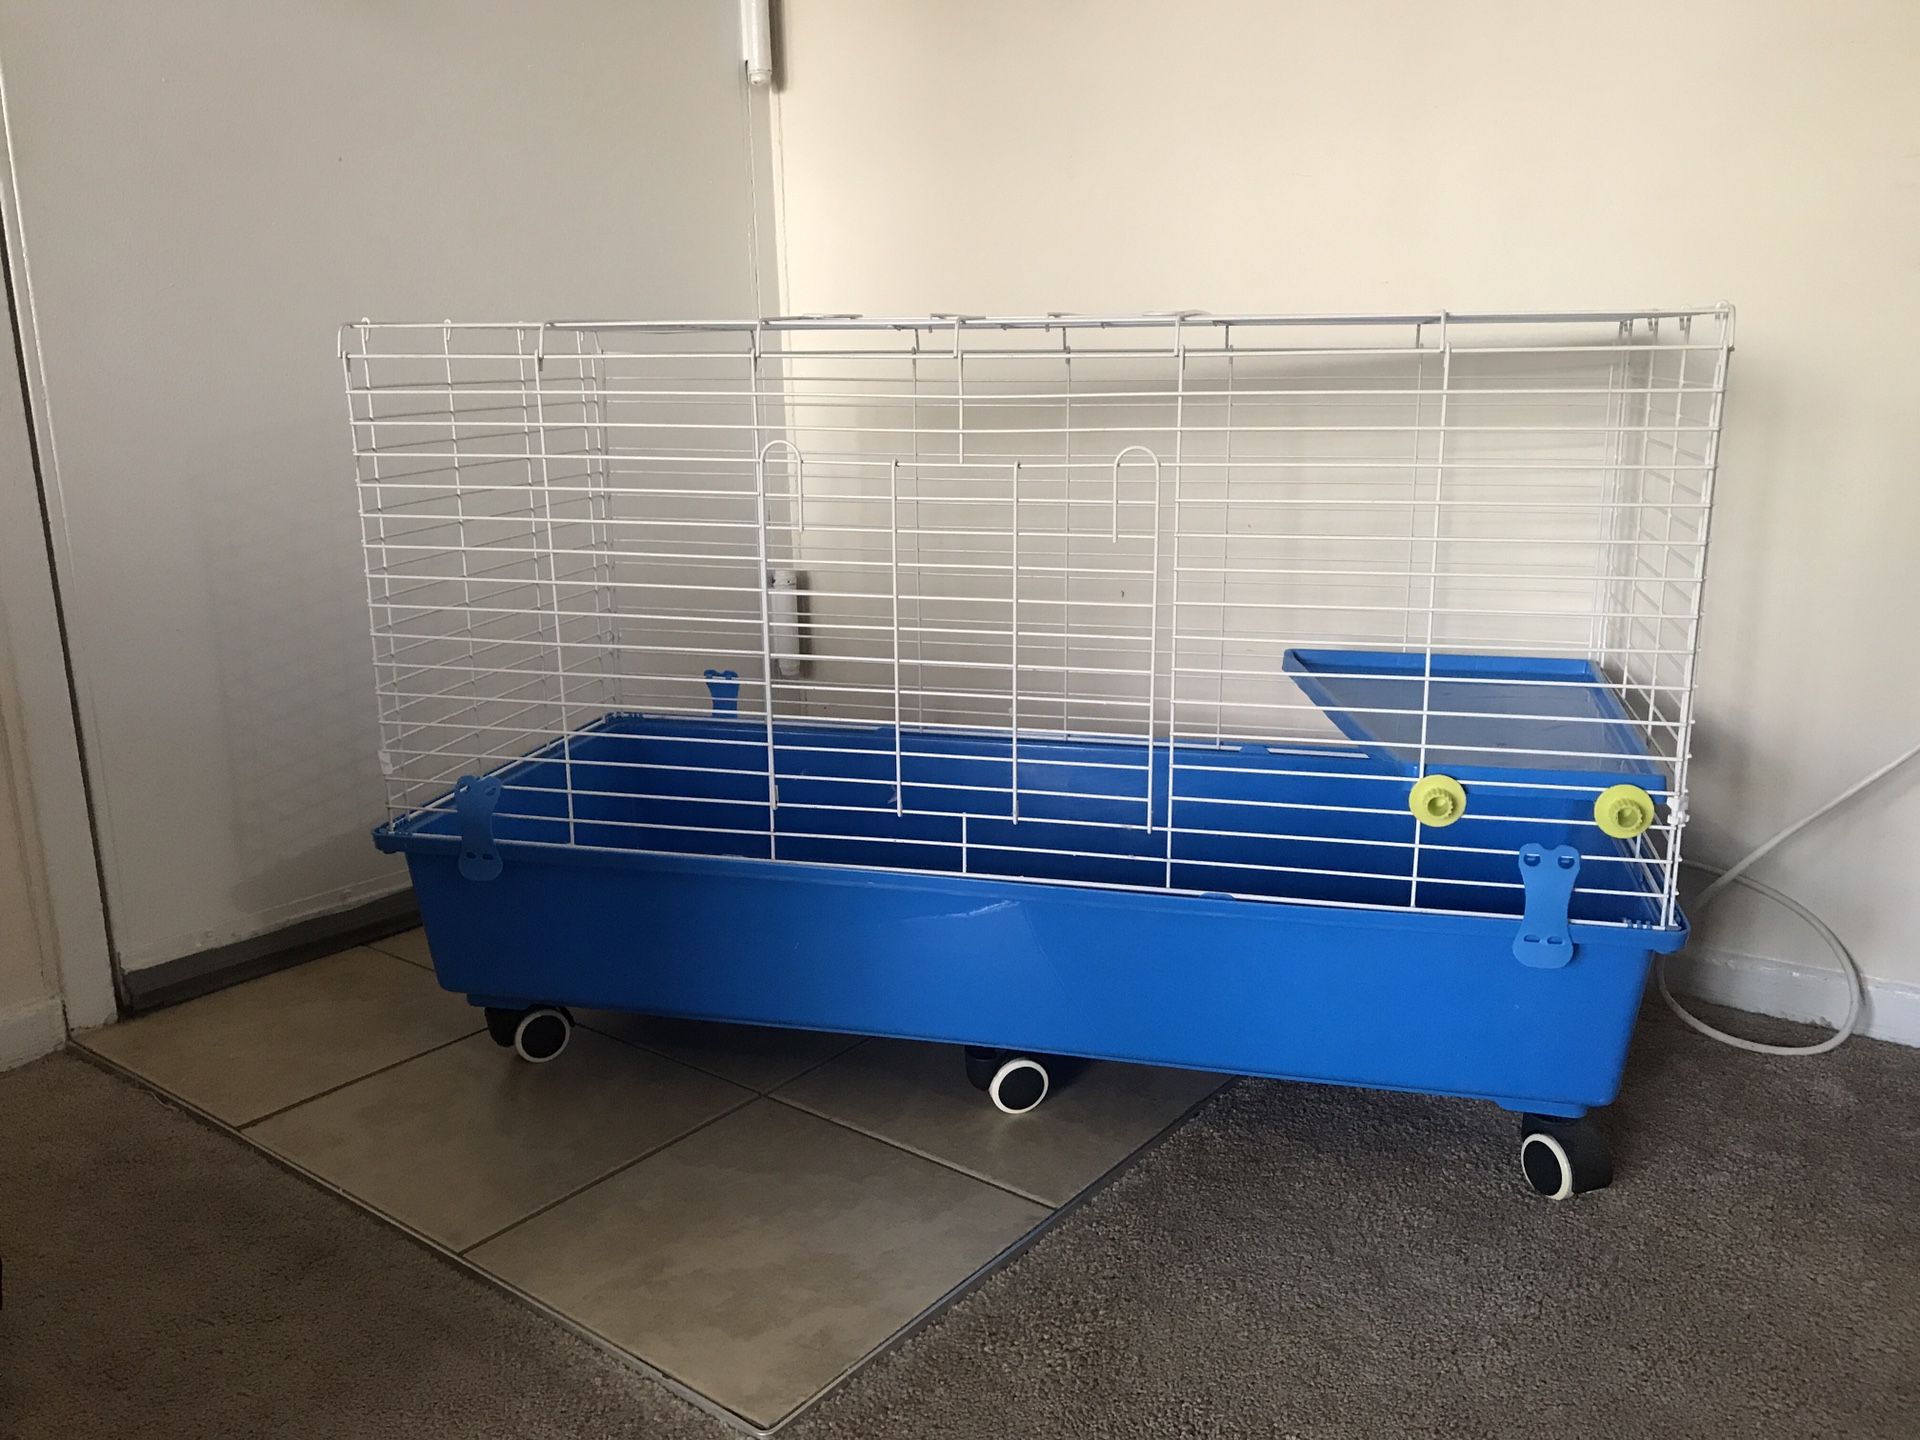 Small pet cage